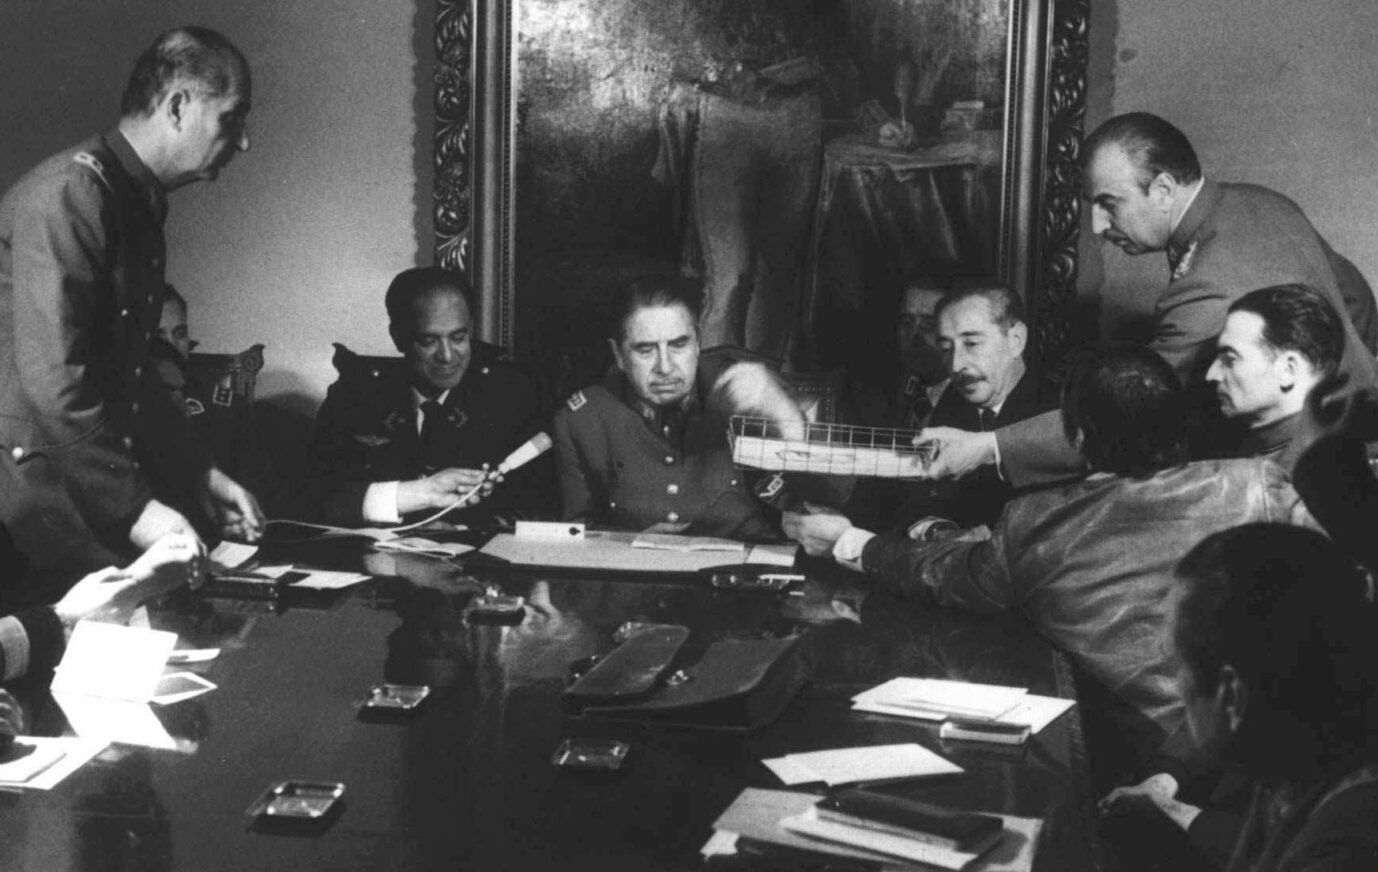 FILE - In this Sept. 20, 1973 file photo, Gen. Augusto Pinochet, center, presides over a meeting with his military staff in Santiago, Chile, days after seizing power from President Salvador Allende. As Chile marks the 40th anniversary of the military coup on Wednesday Sept. 11, 2013 that was led by Pinochet, Allende's legacy is thriving. A socialist is poised to reclaim the presidency and a new generation, born after the return to democracy in 1990 has taken to the streets in vast numbers to demand the sort of social goals Allende promoted. (AP Photo/File)